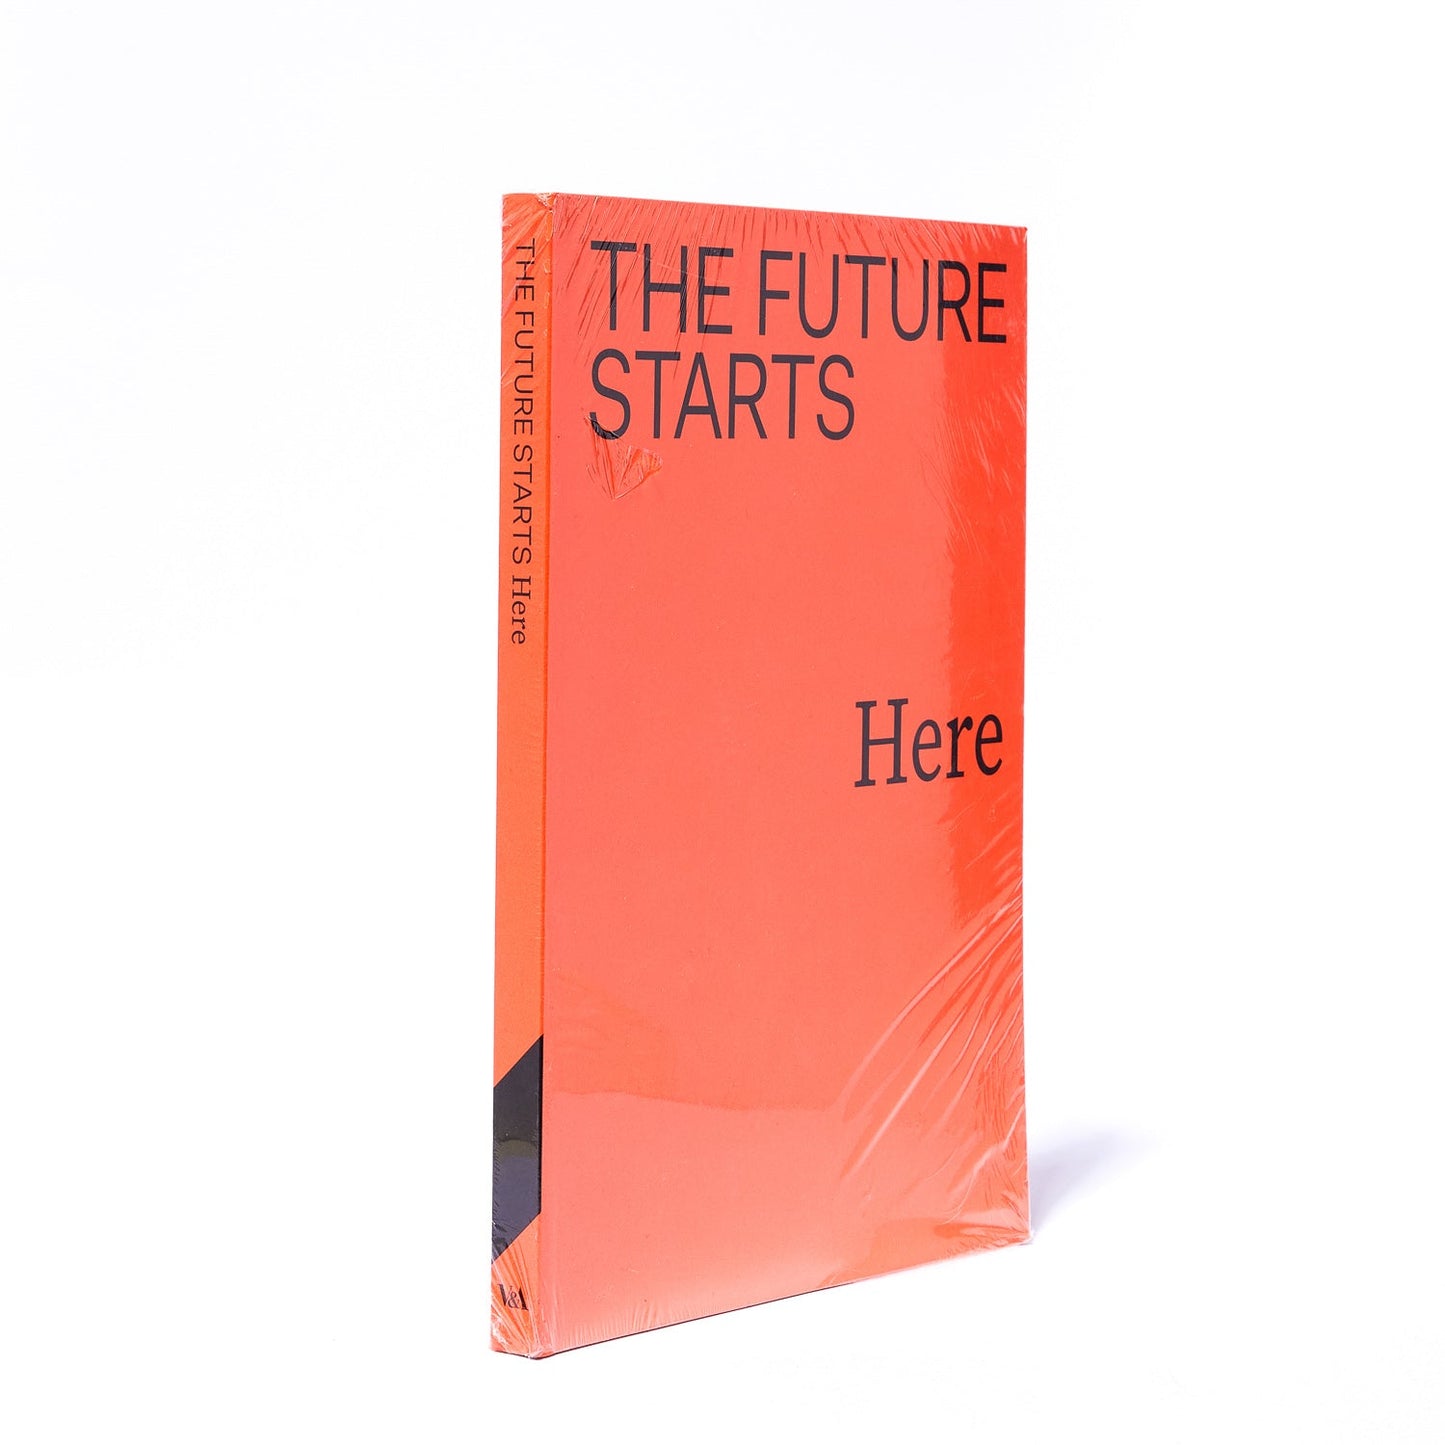 THE FUTURE STARTS HERE